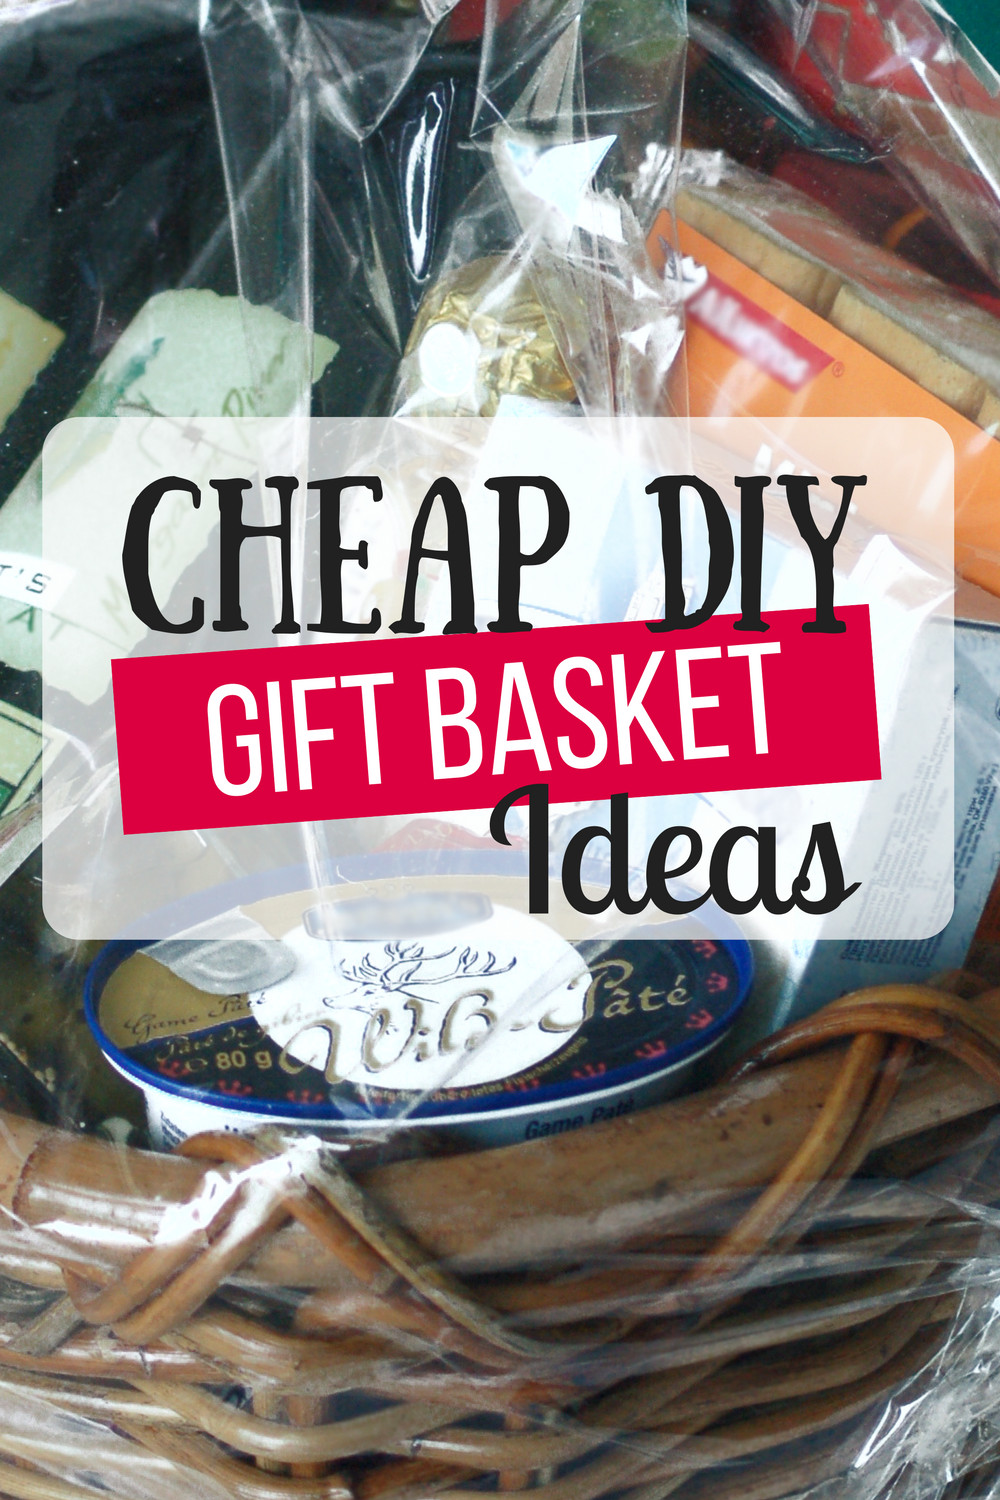 Making A Gift Basket Ideas
 Cheap DIY Gift Baskets The Busy Bud er